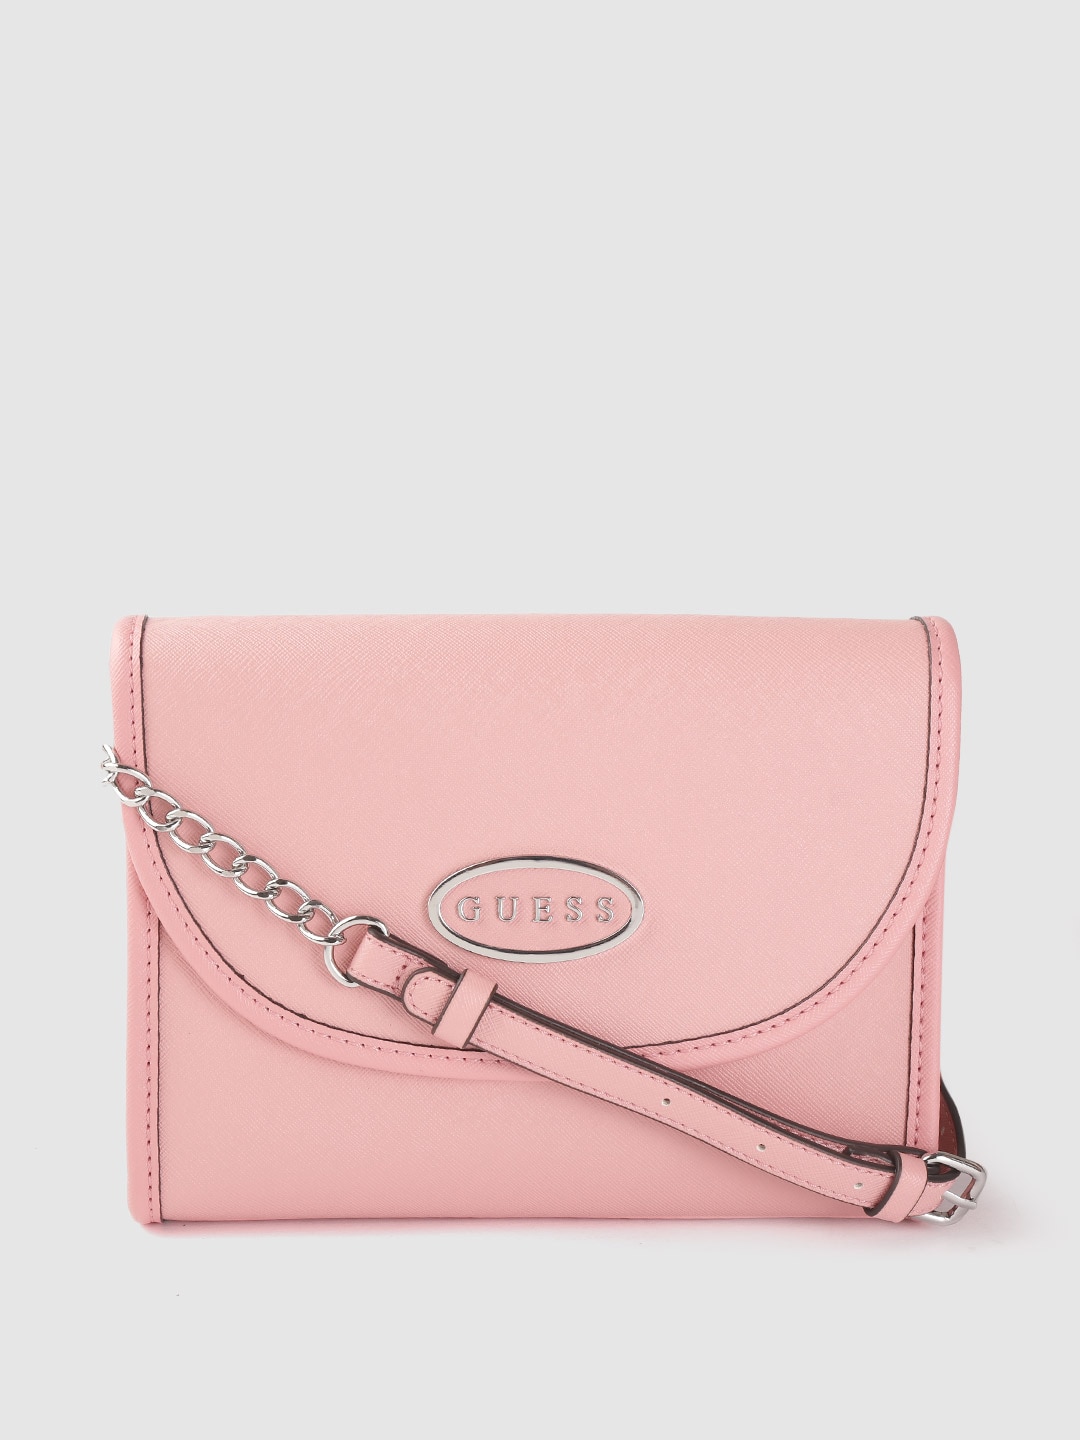 GUESS Women Pink Structured Sling Bag Price in India